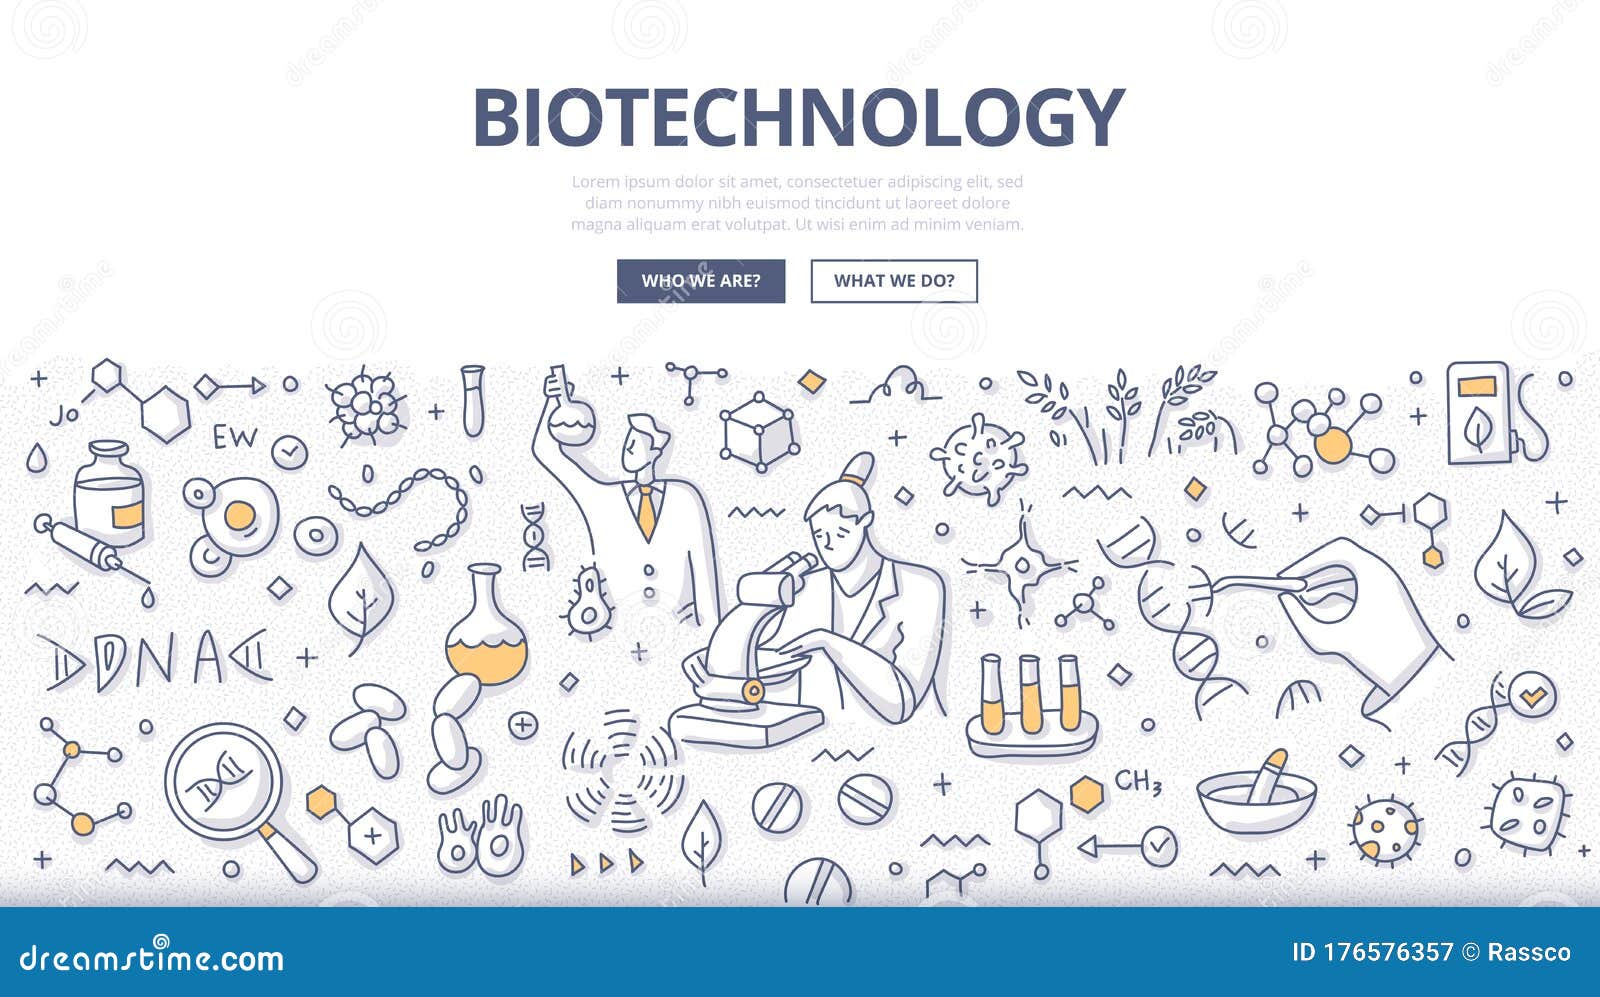 Biotechnology Doodle Concept Stock Vector Illustration of